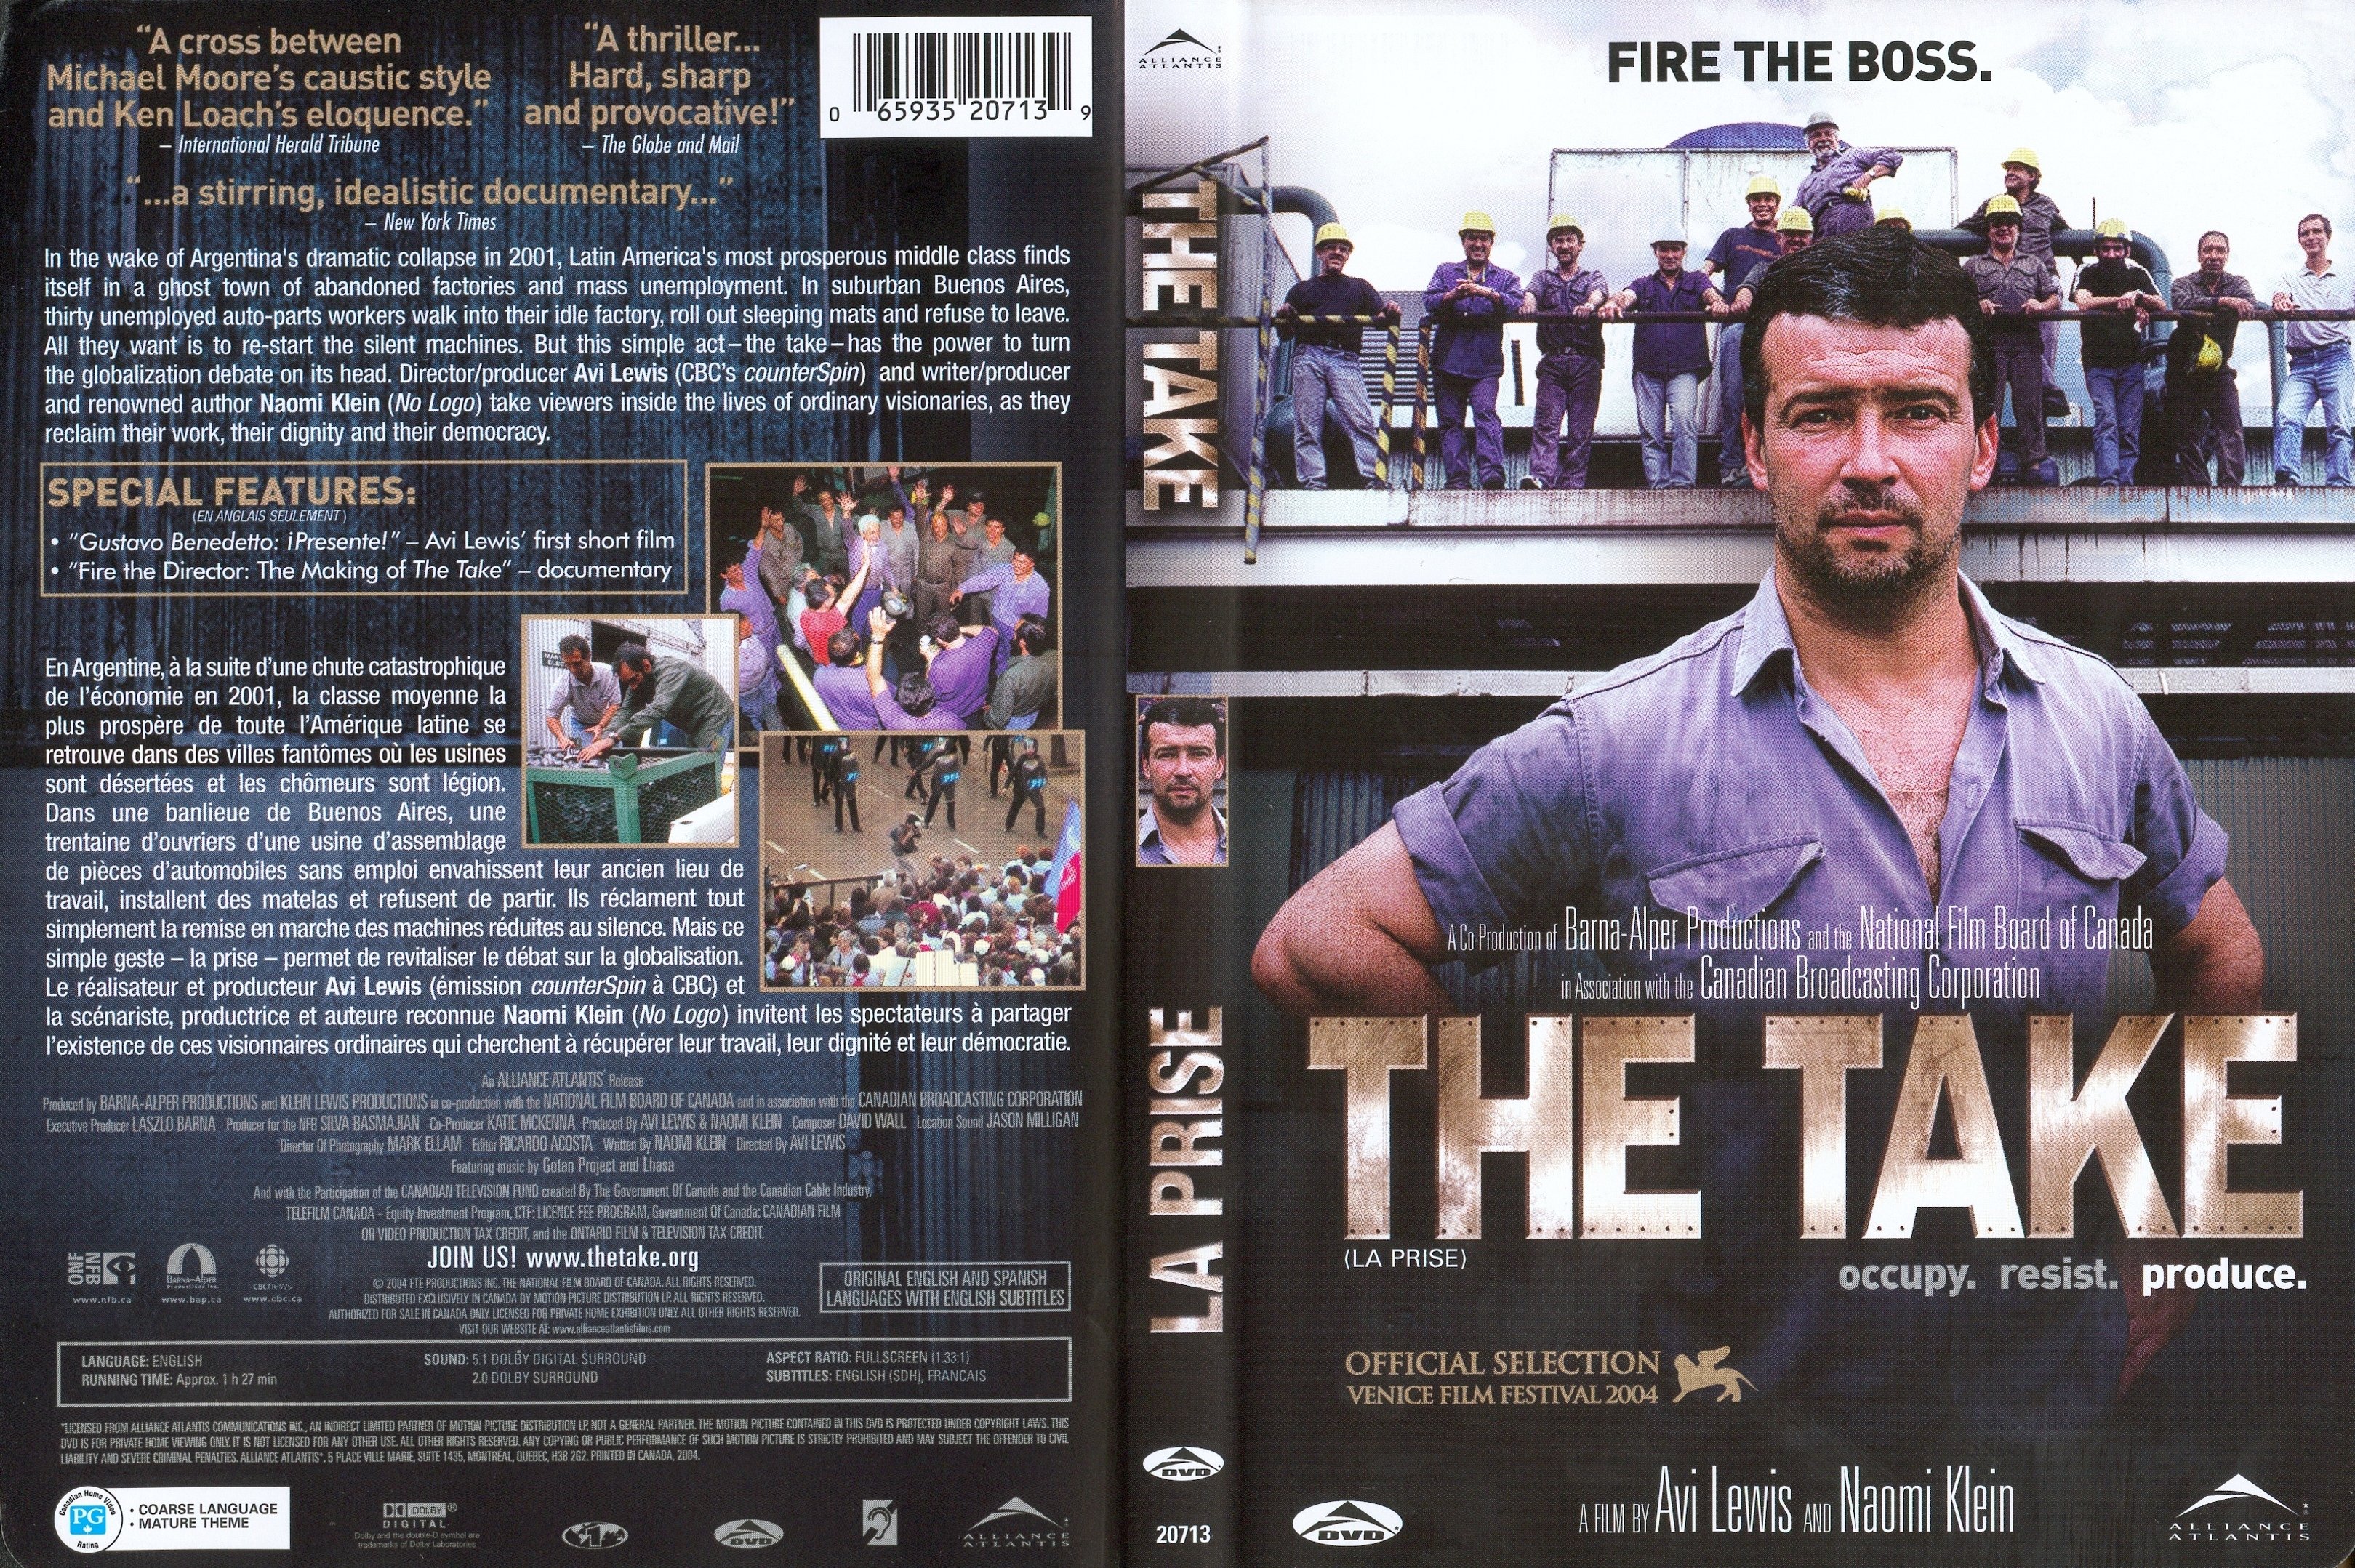 Jaquette DVD The take